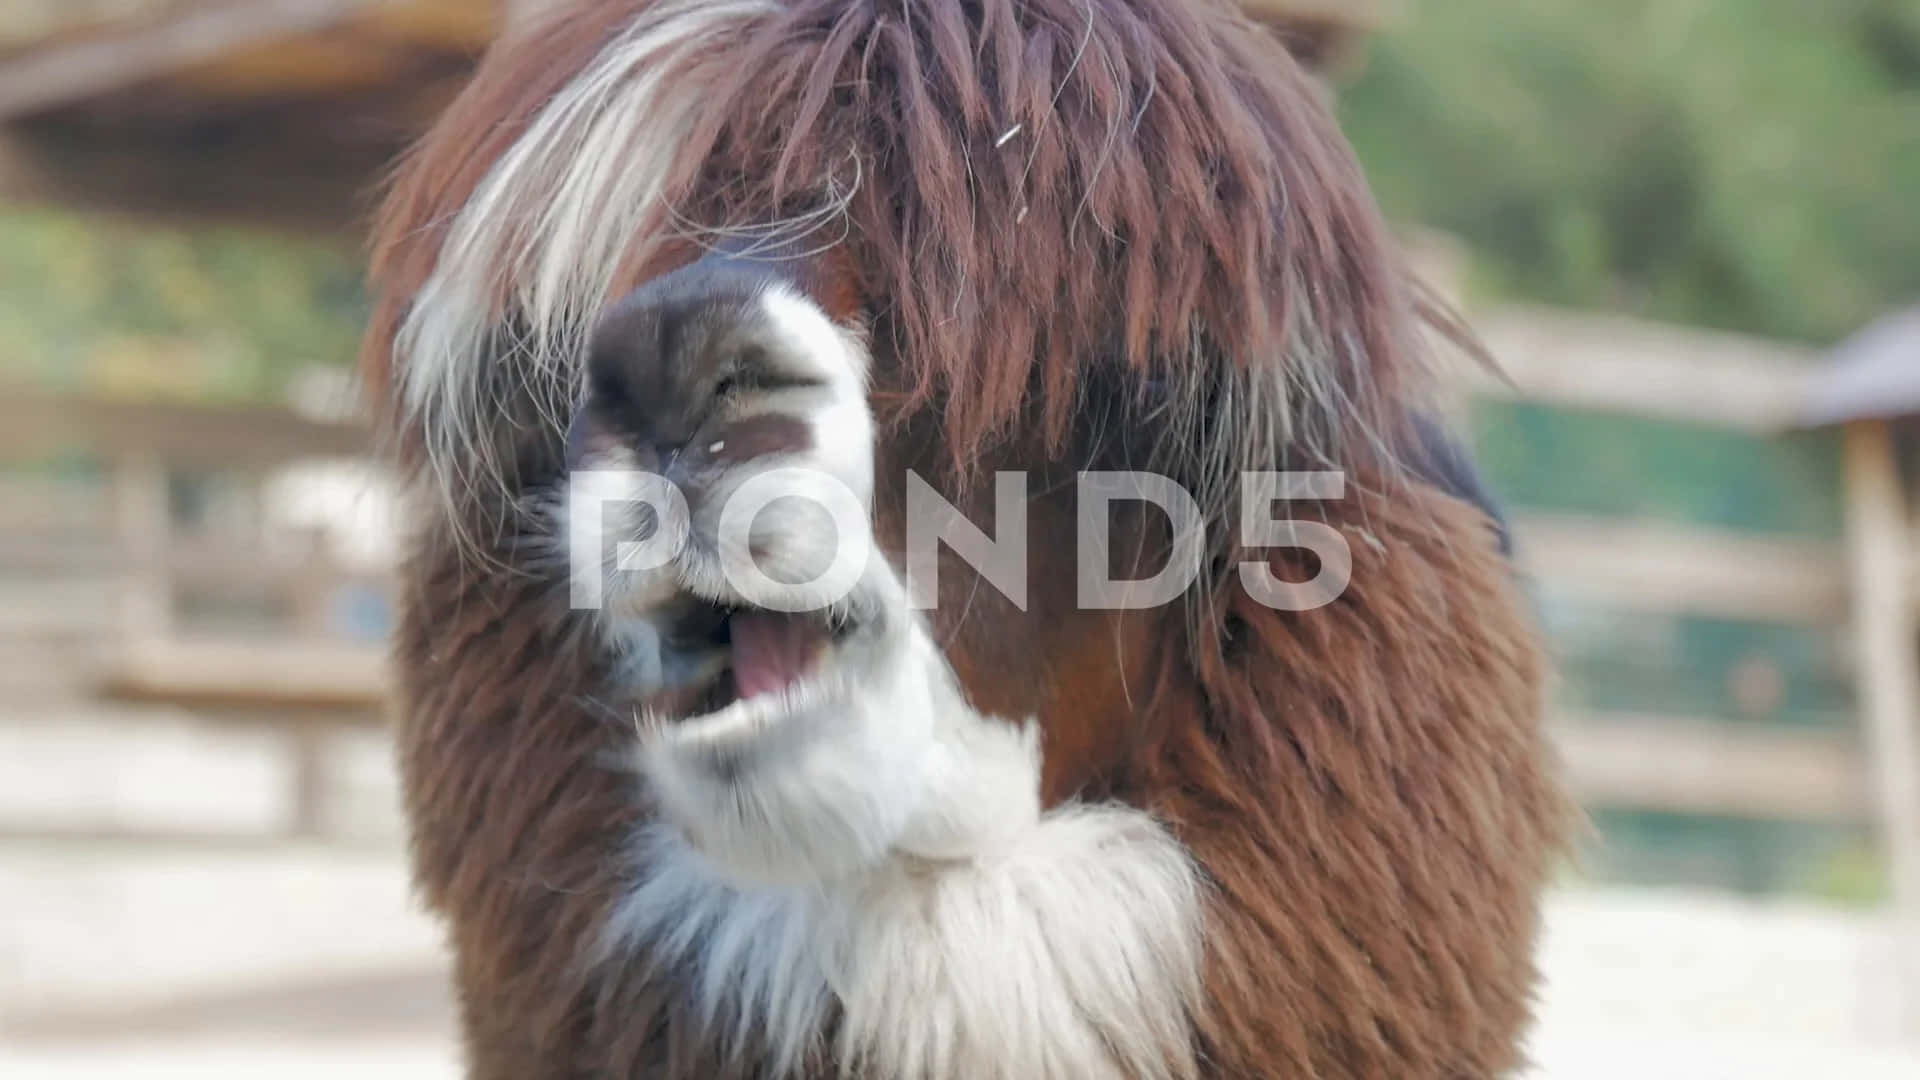 A Llama With Long Hair And A Big Mouth